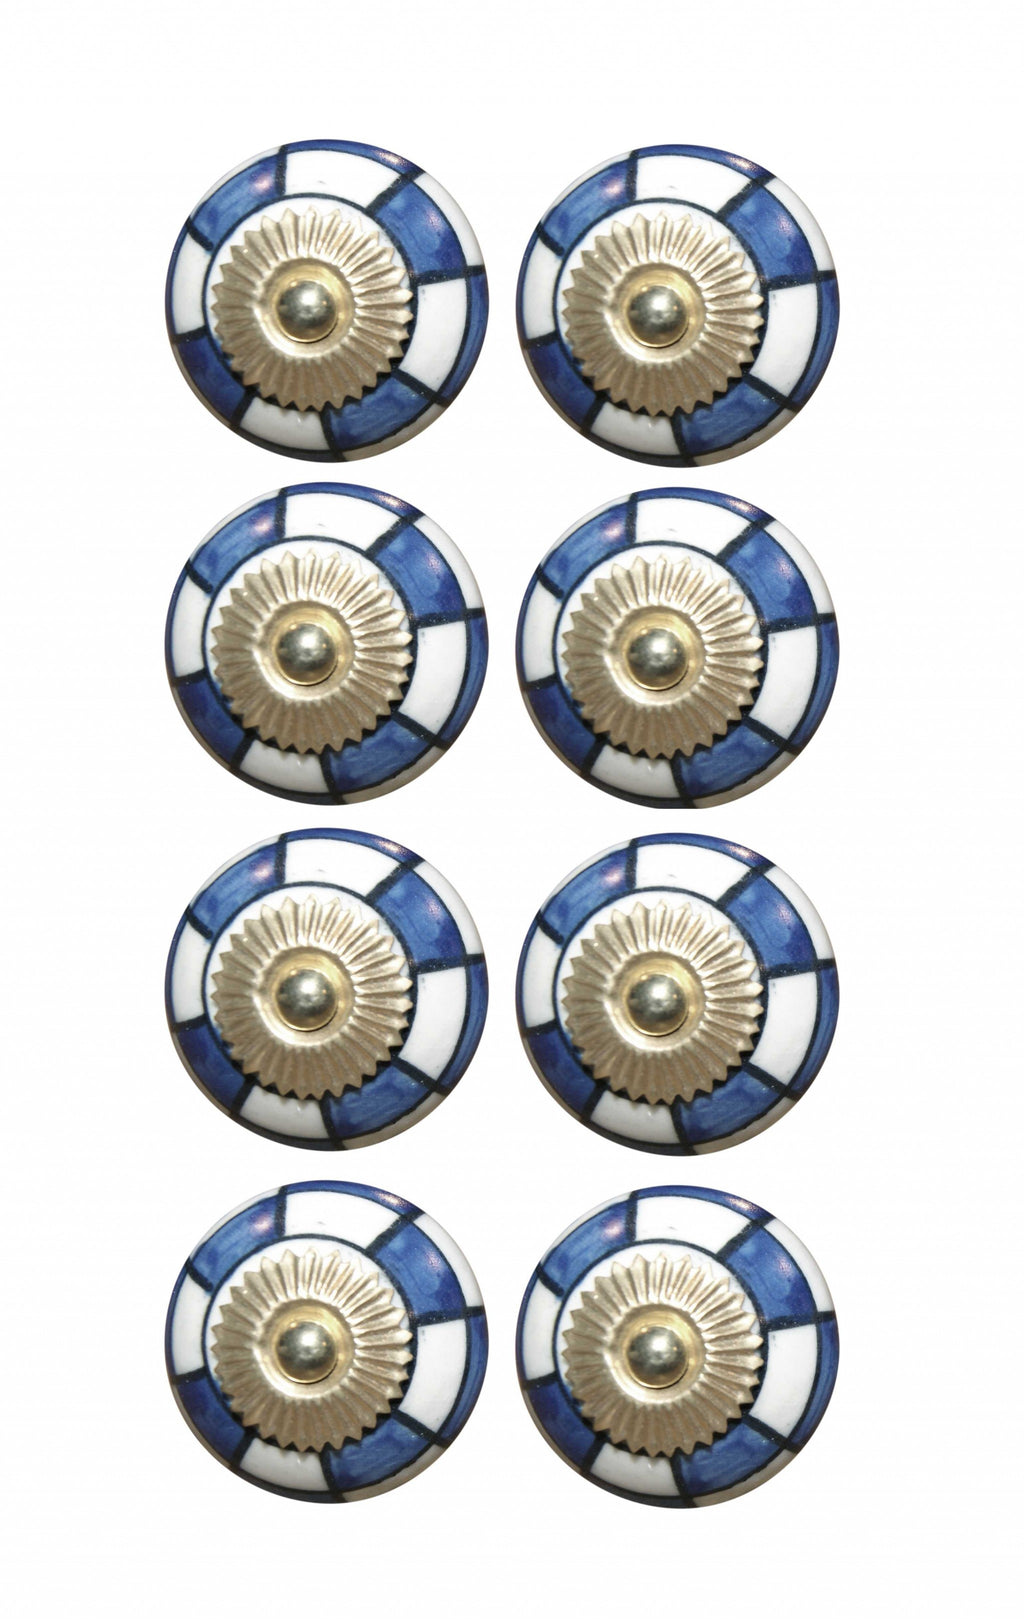 Charming Blue And Gold Set Of 8 Knobs - 99fab 